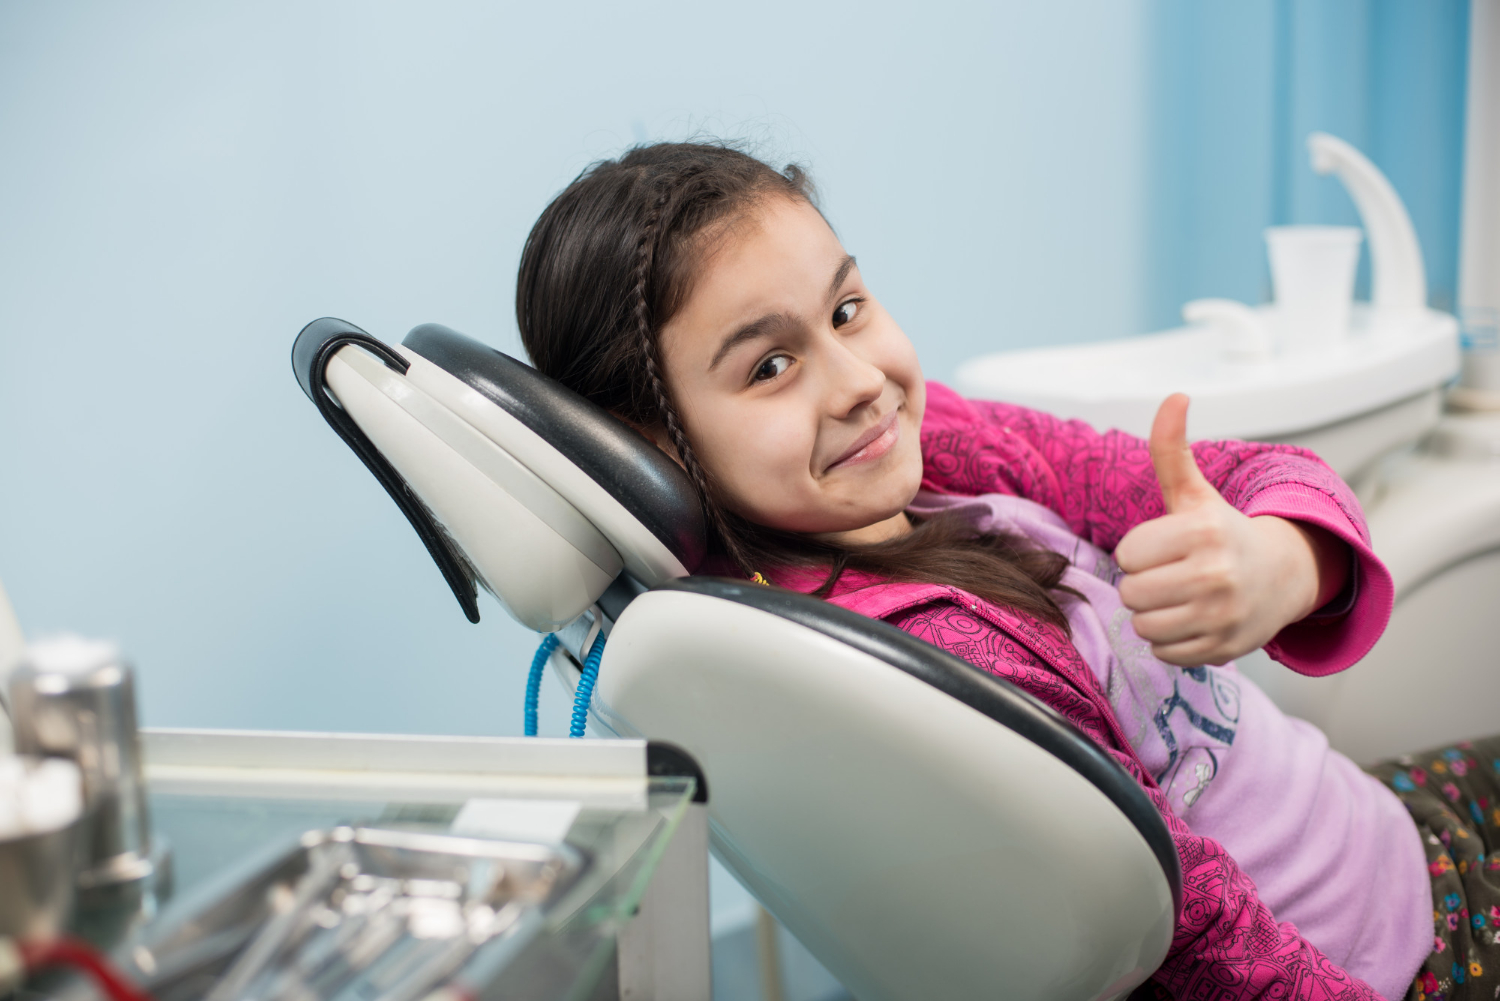 atient-girl-showing-thumbs-up-dental-office